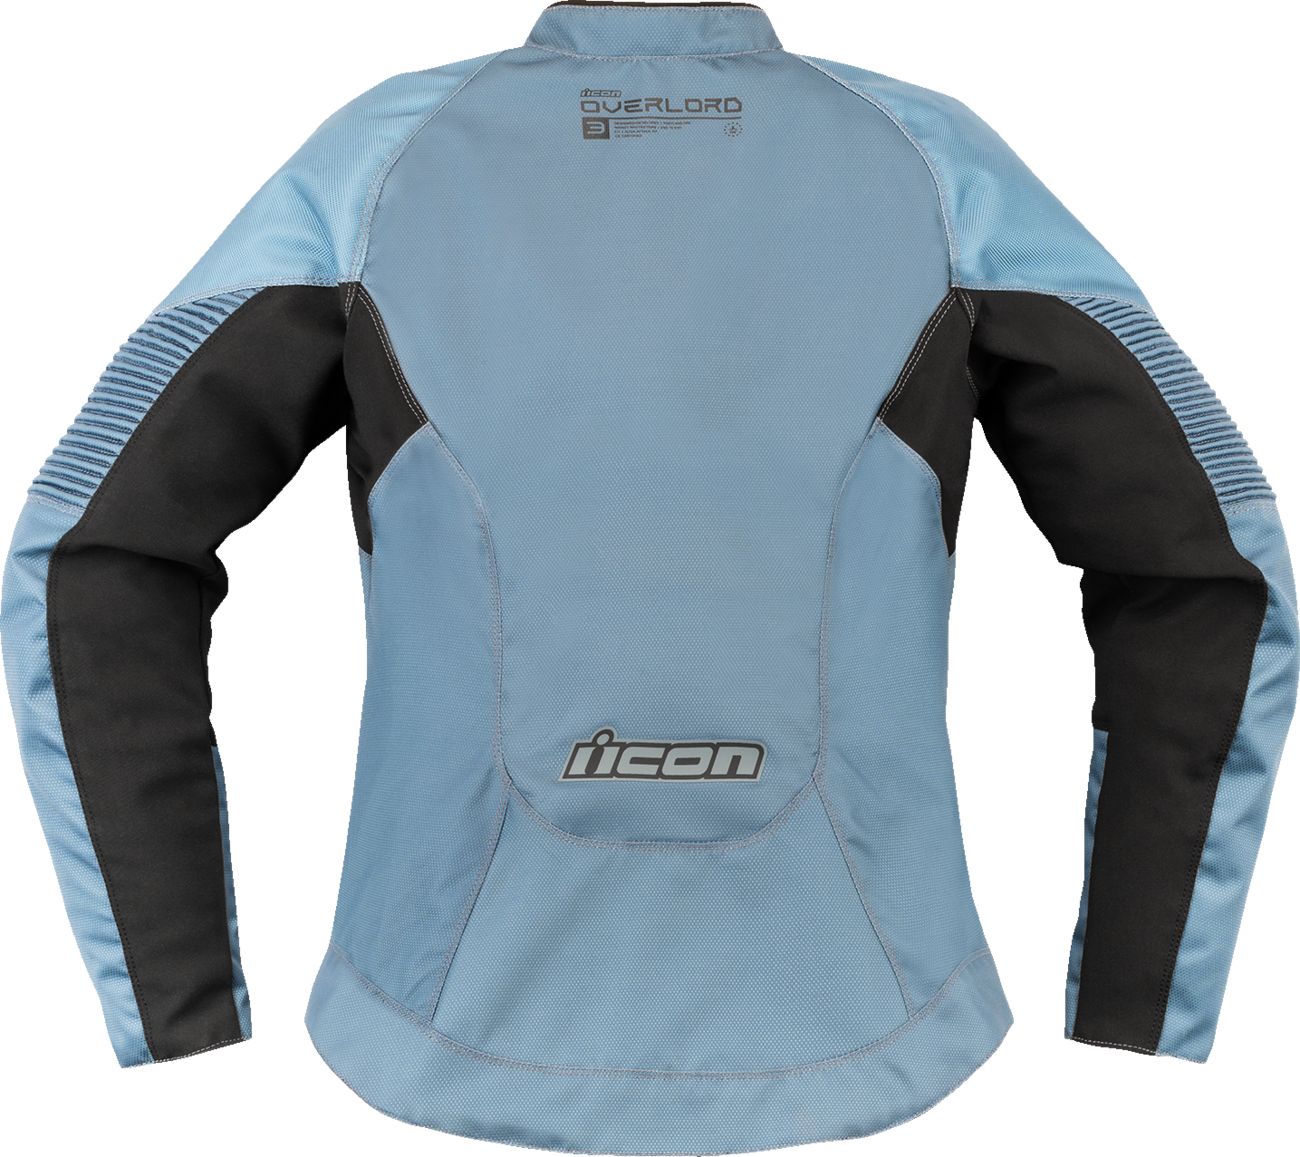 ICON Women's Overlord3™ CE Jacket - Blue - XL 2822-1601